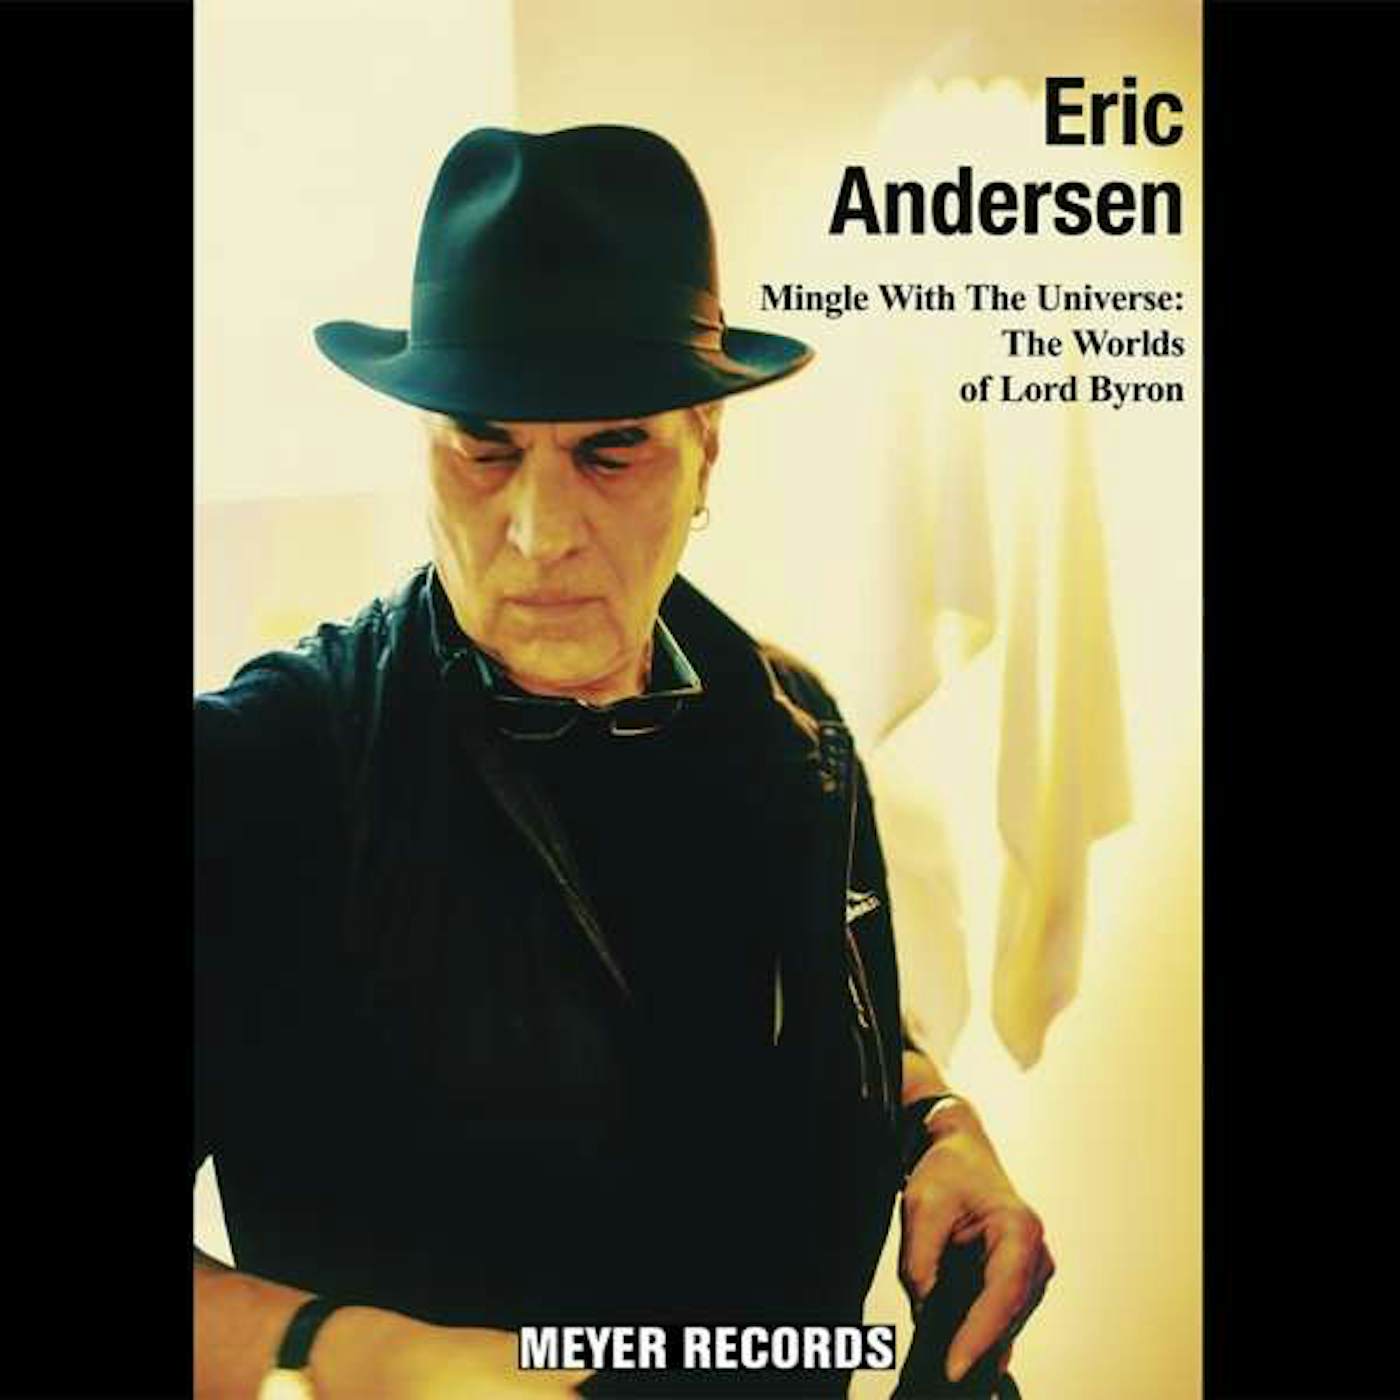 Eric Andersen MINGLE WITH THE UNIVERSE: THE WORLDS OF LORD BYRON Vinyl Record